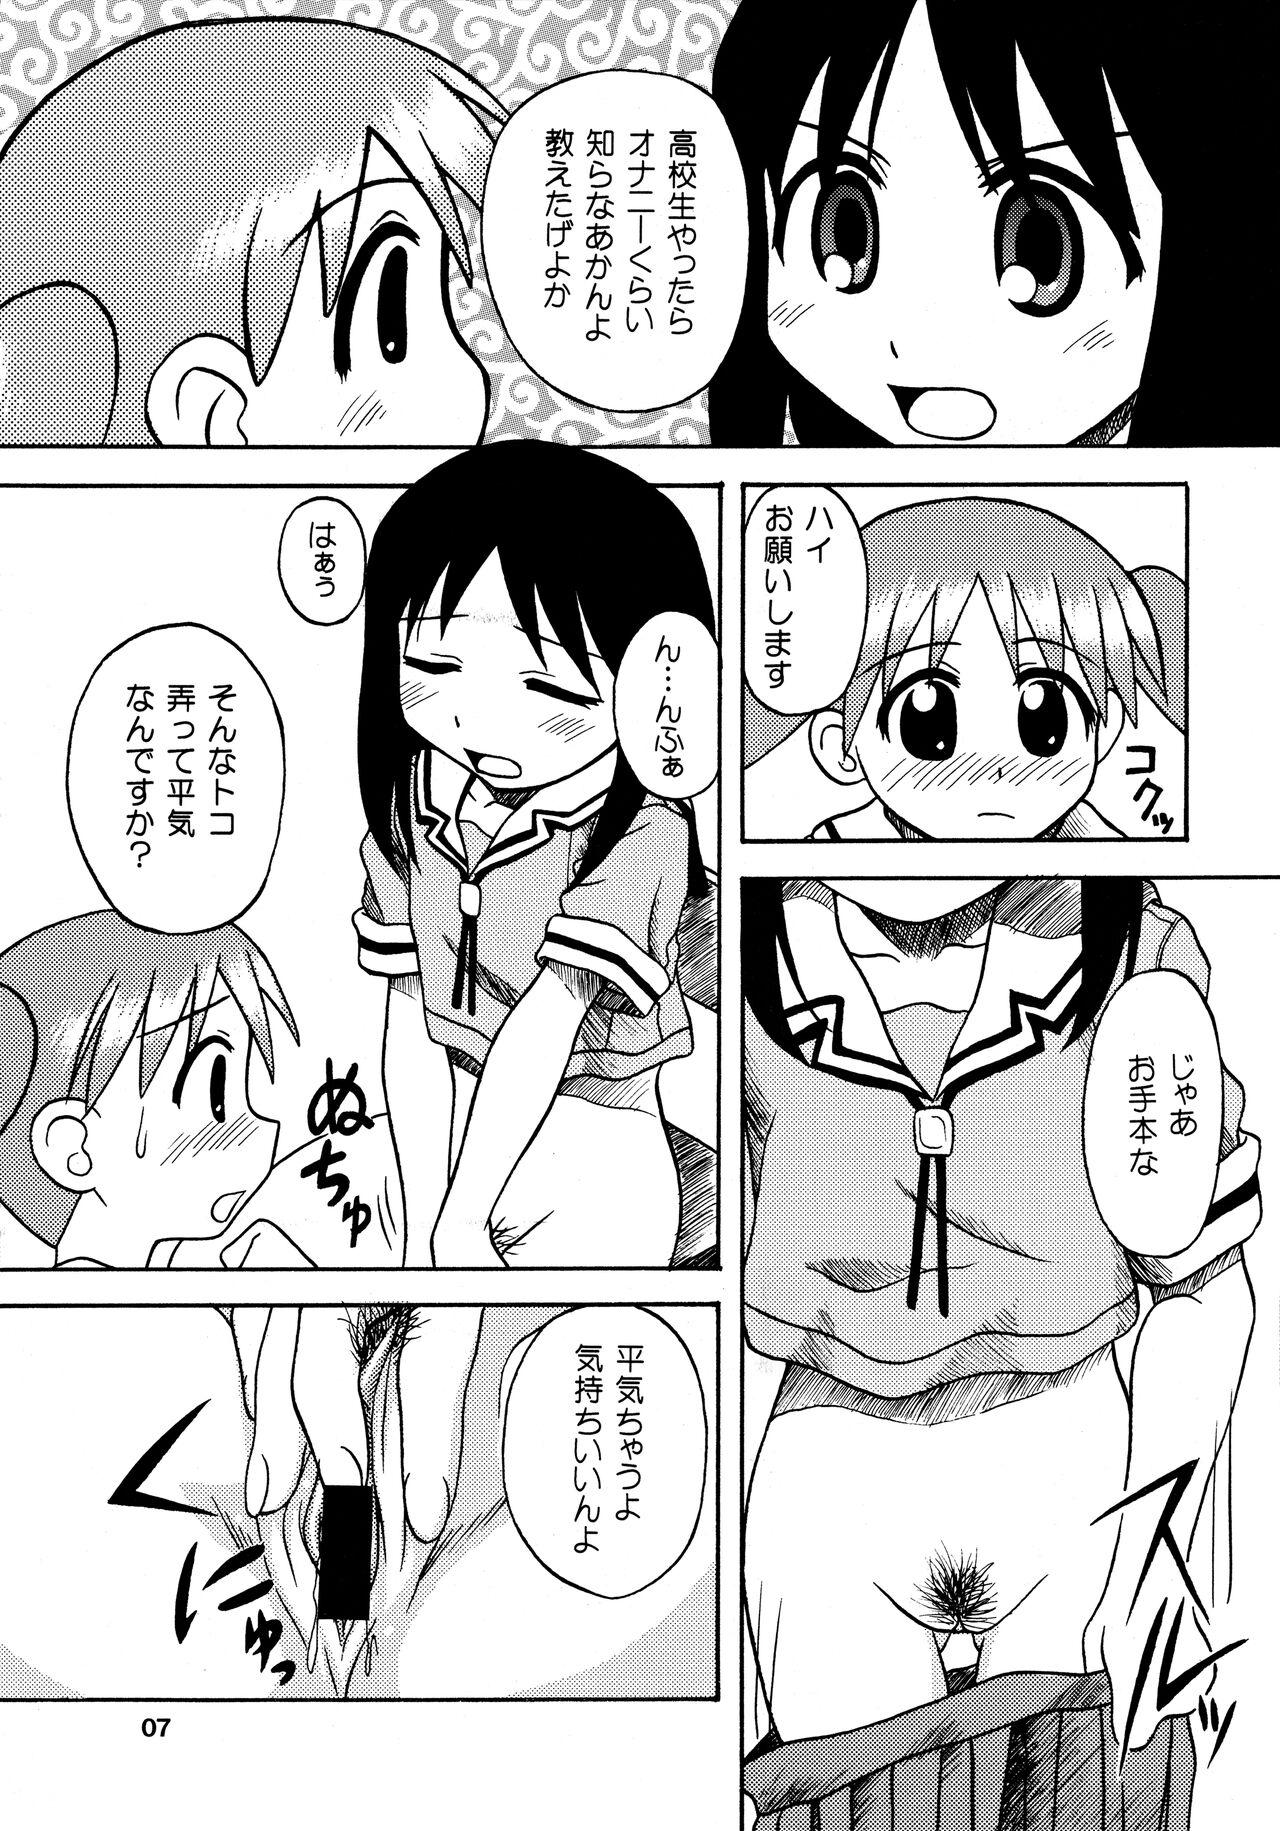 Naked ANOTHER LIFE - Azumanga daioh Perfect Body Porn - Page 7